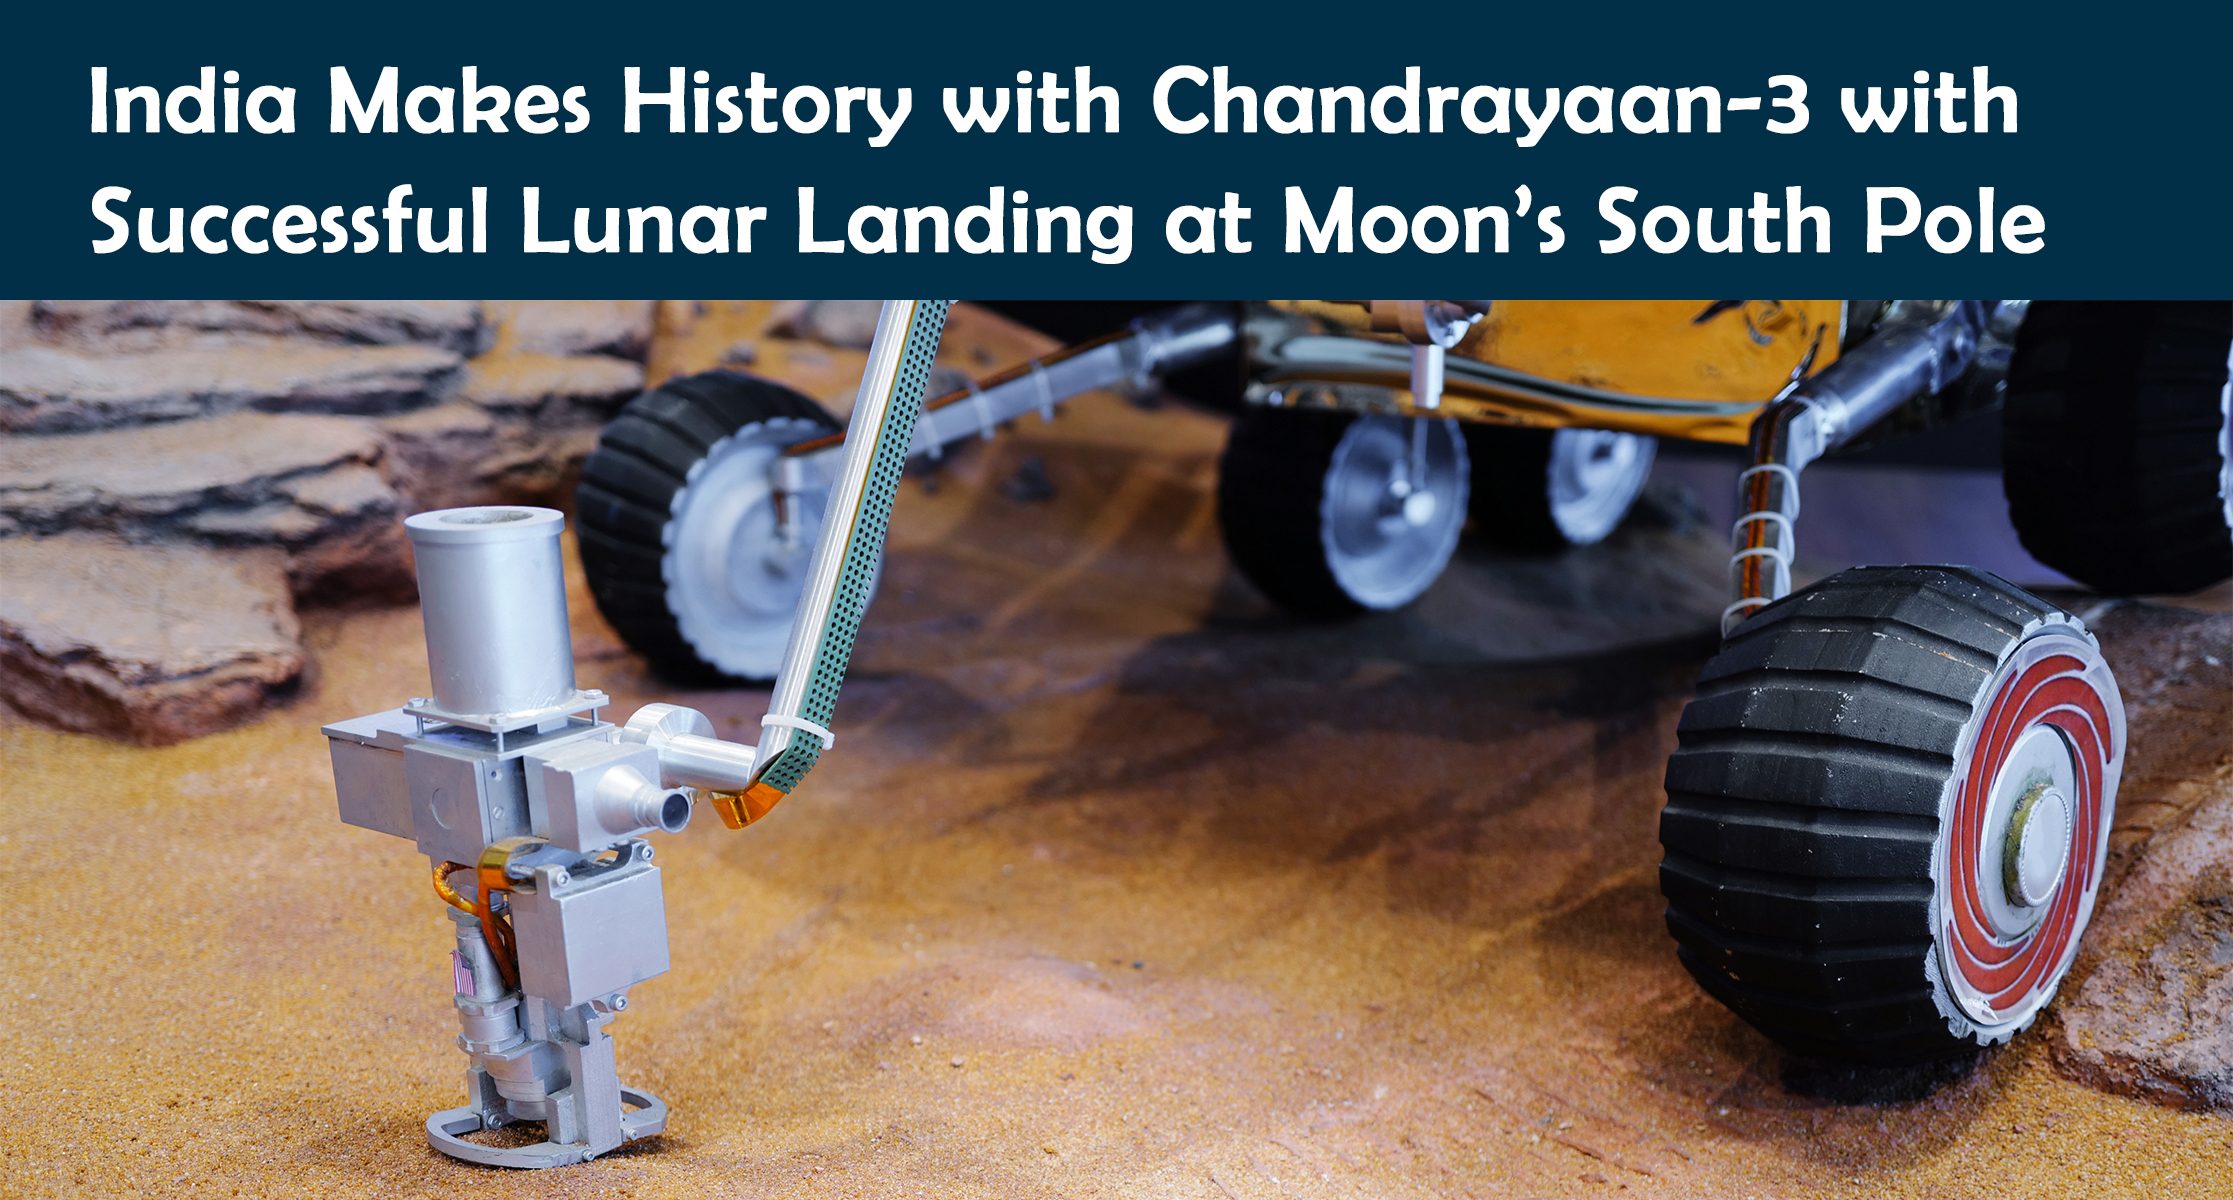 India Makes History with Chandrayaan-3 with Successful Lunar Landing at Moon’s South Pole